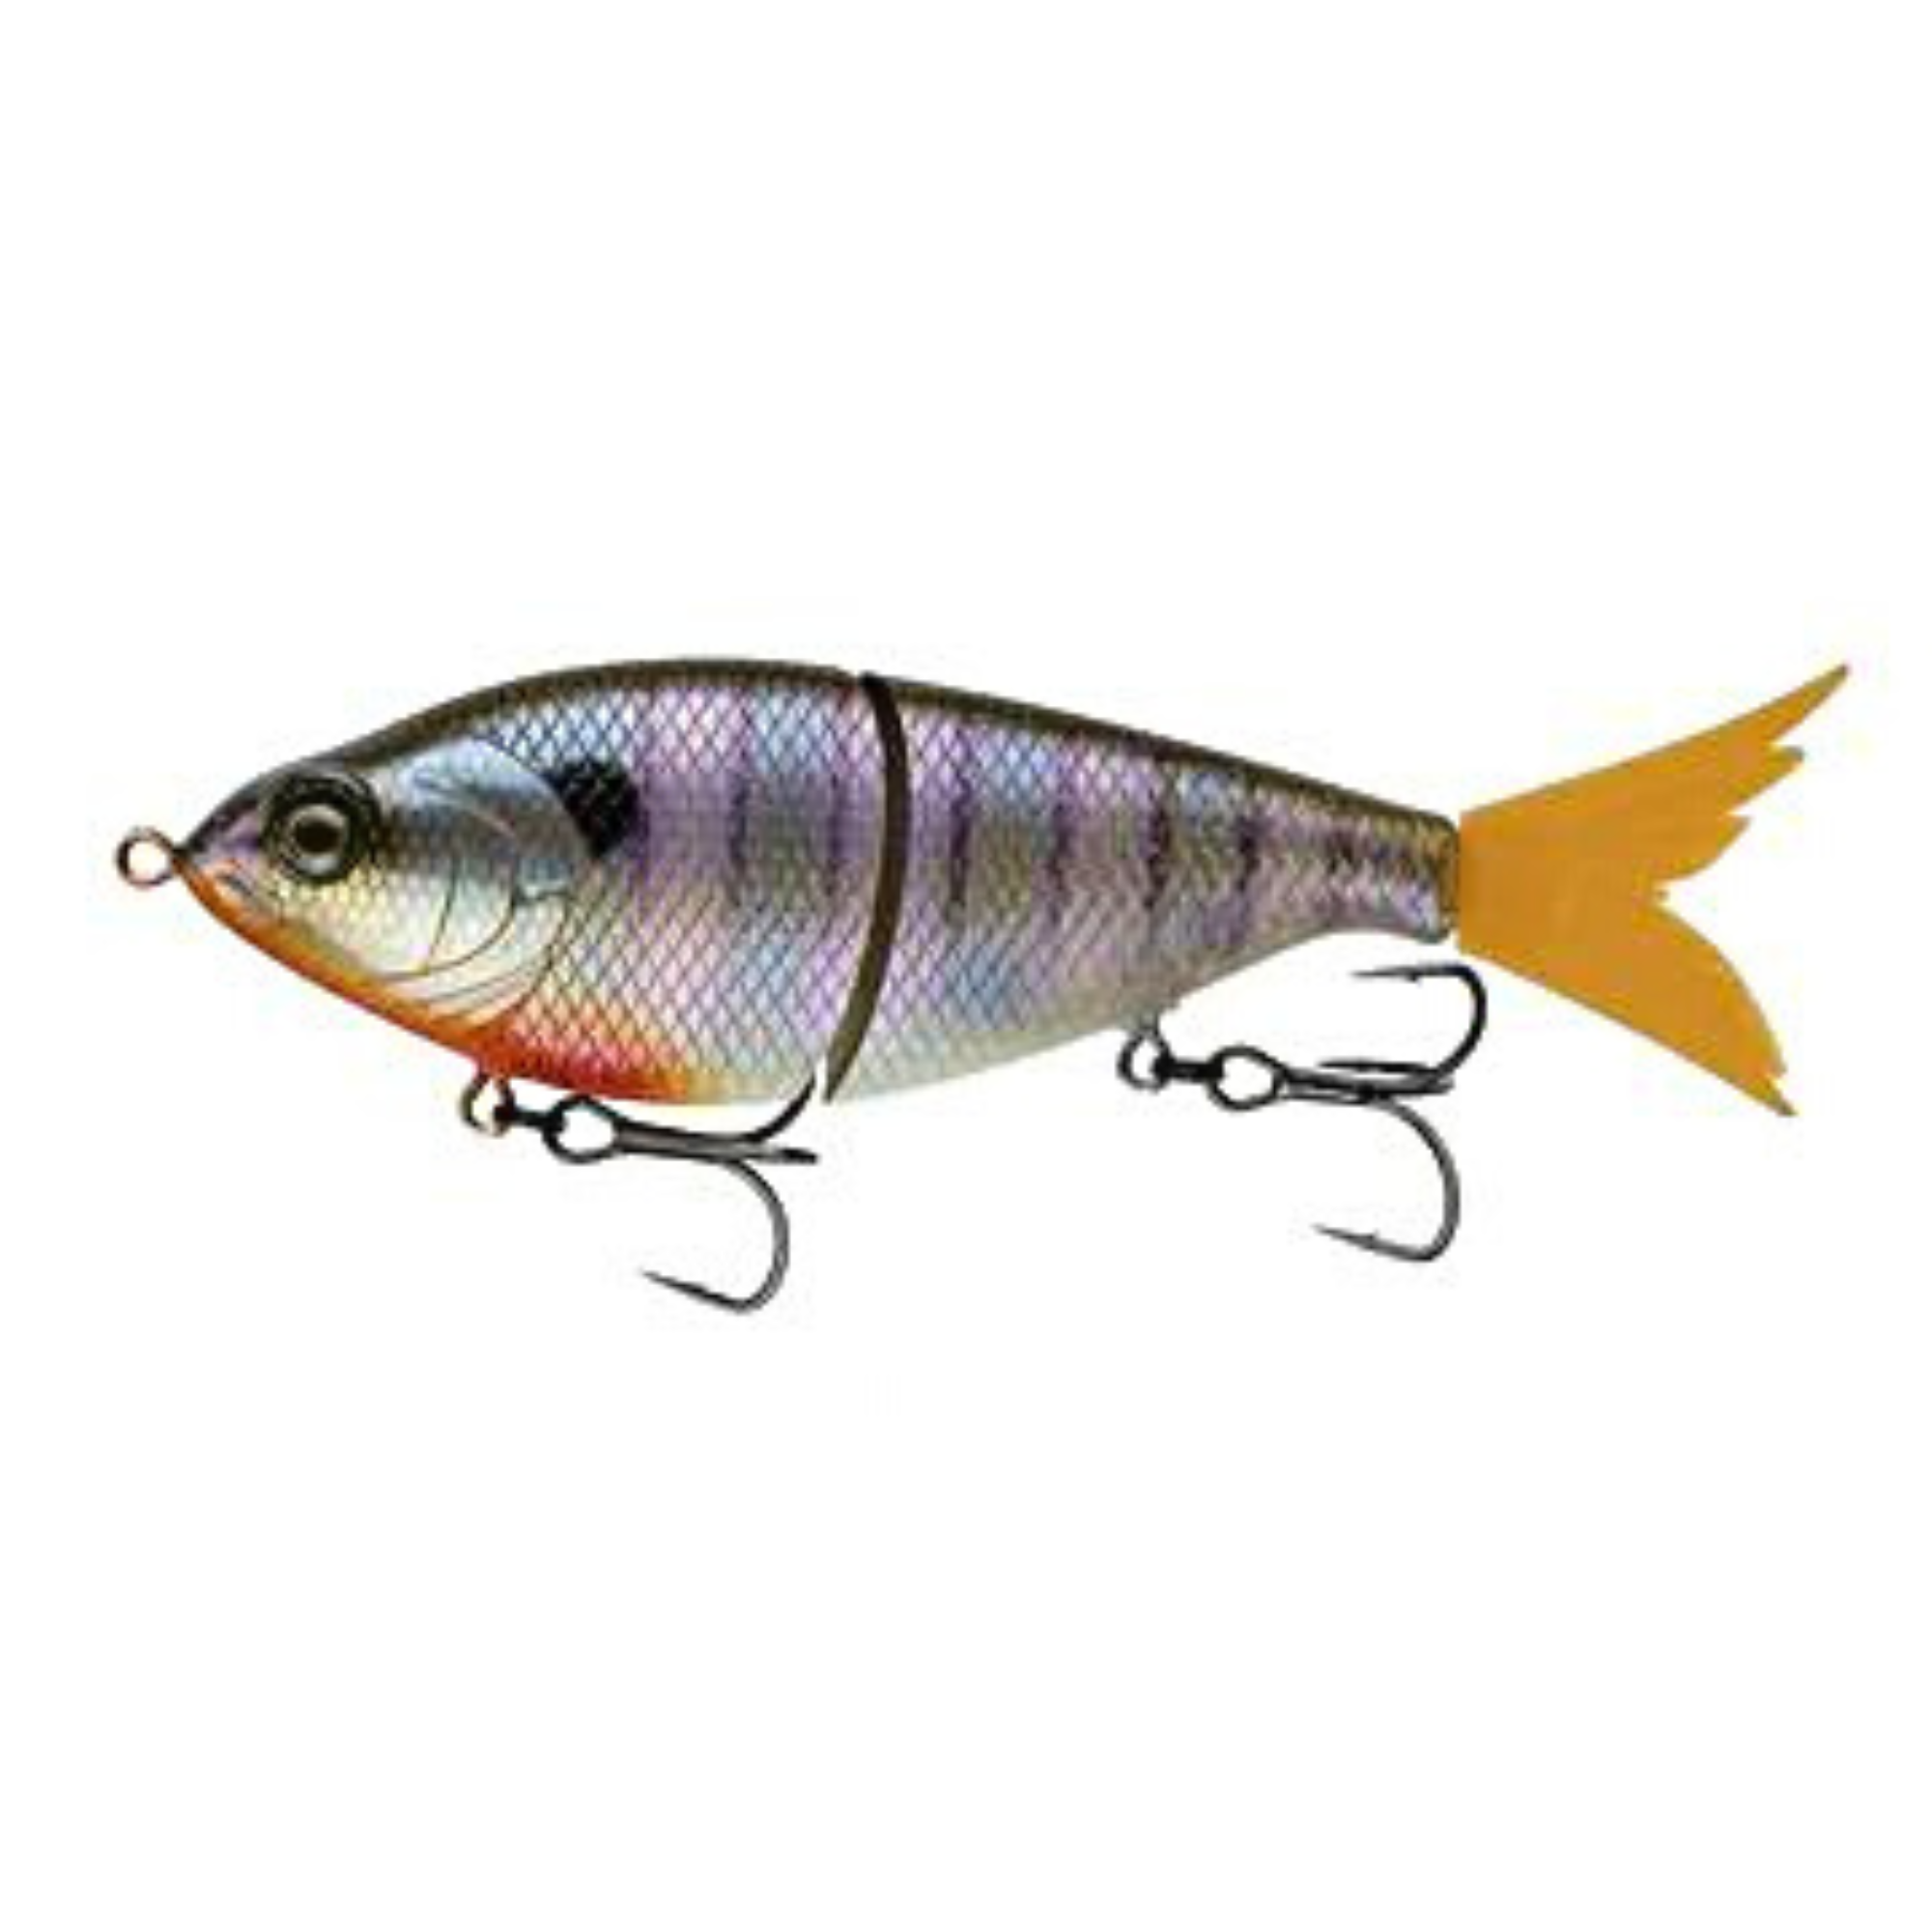 Flow Glider 130, 6th Sense Fishing Lures, Baits, Tackle